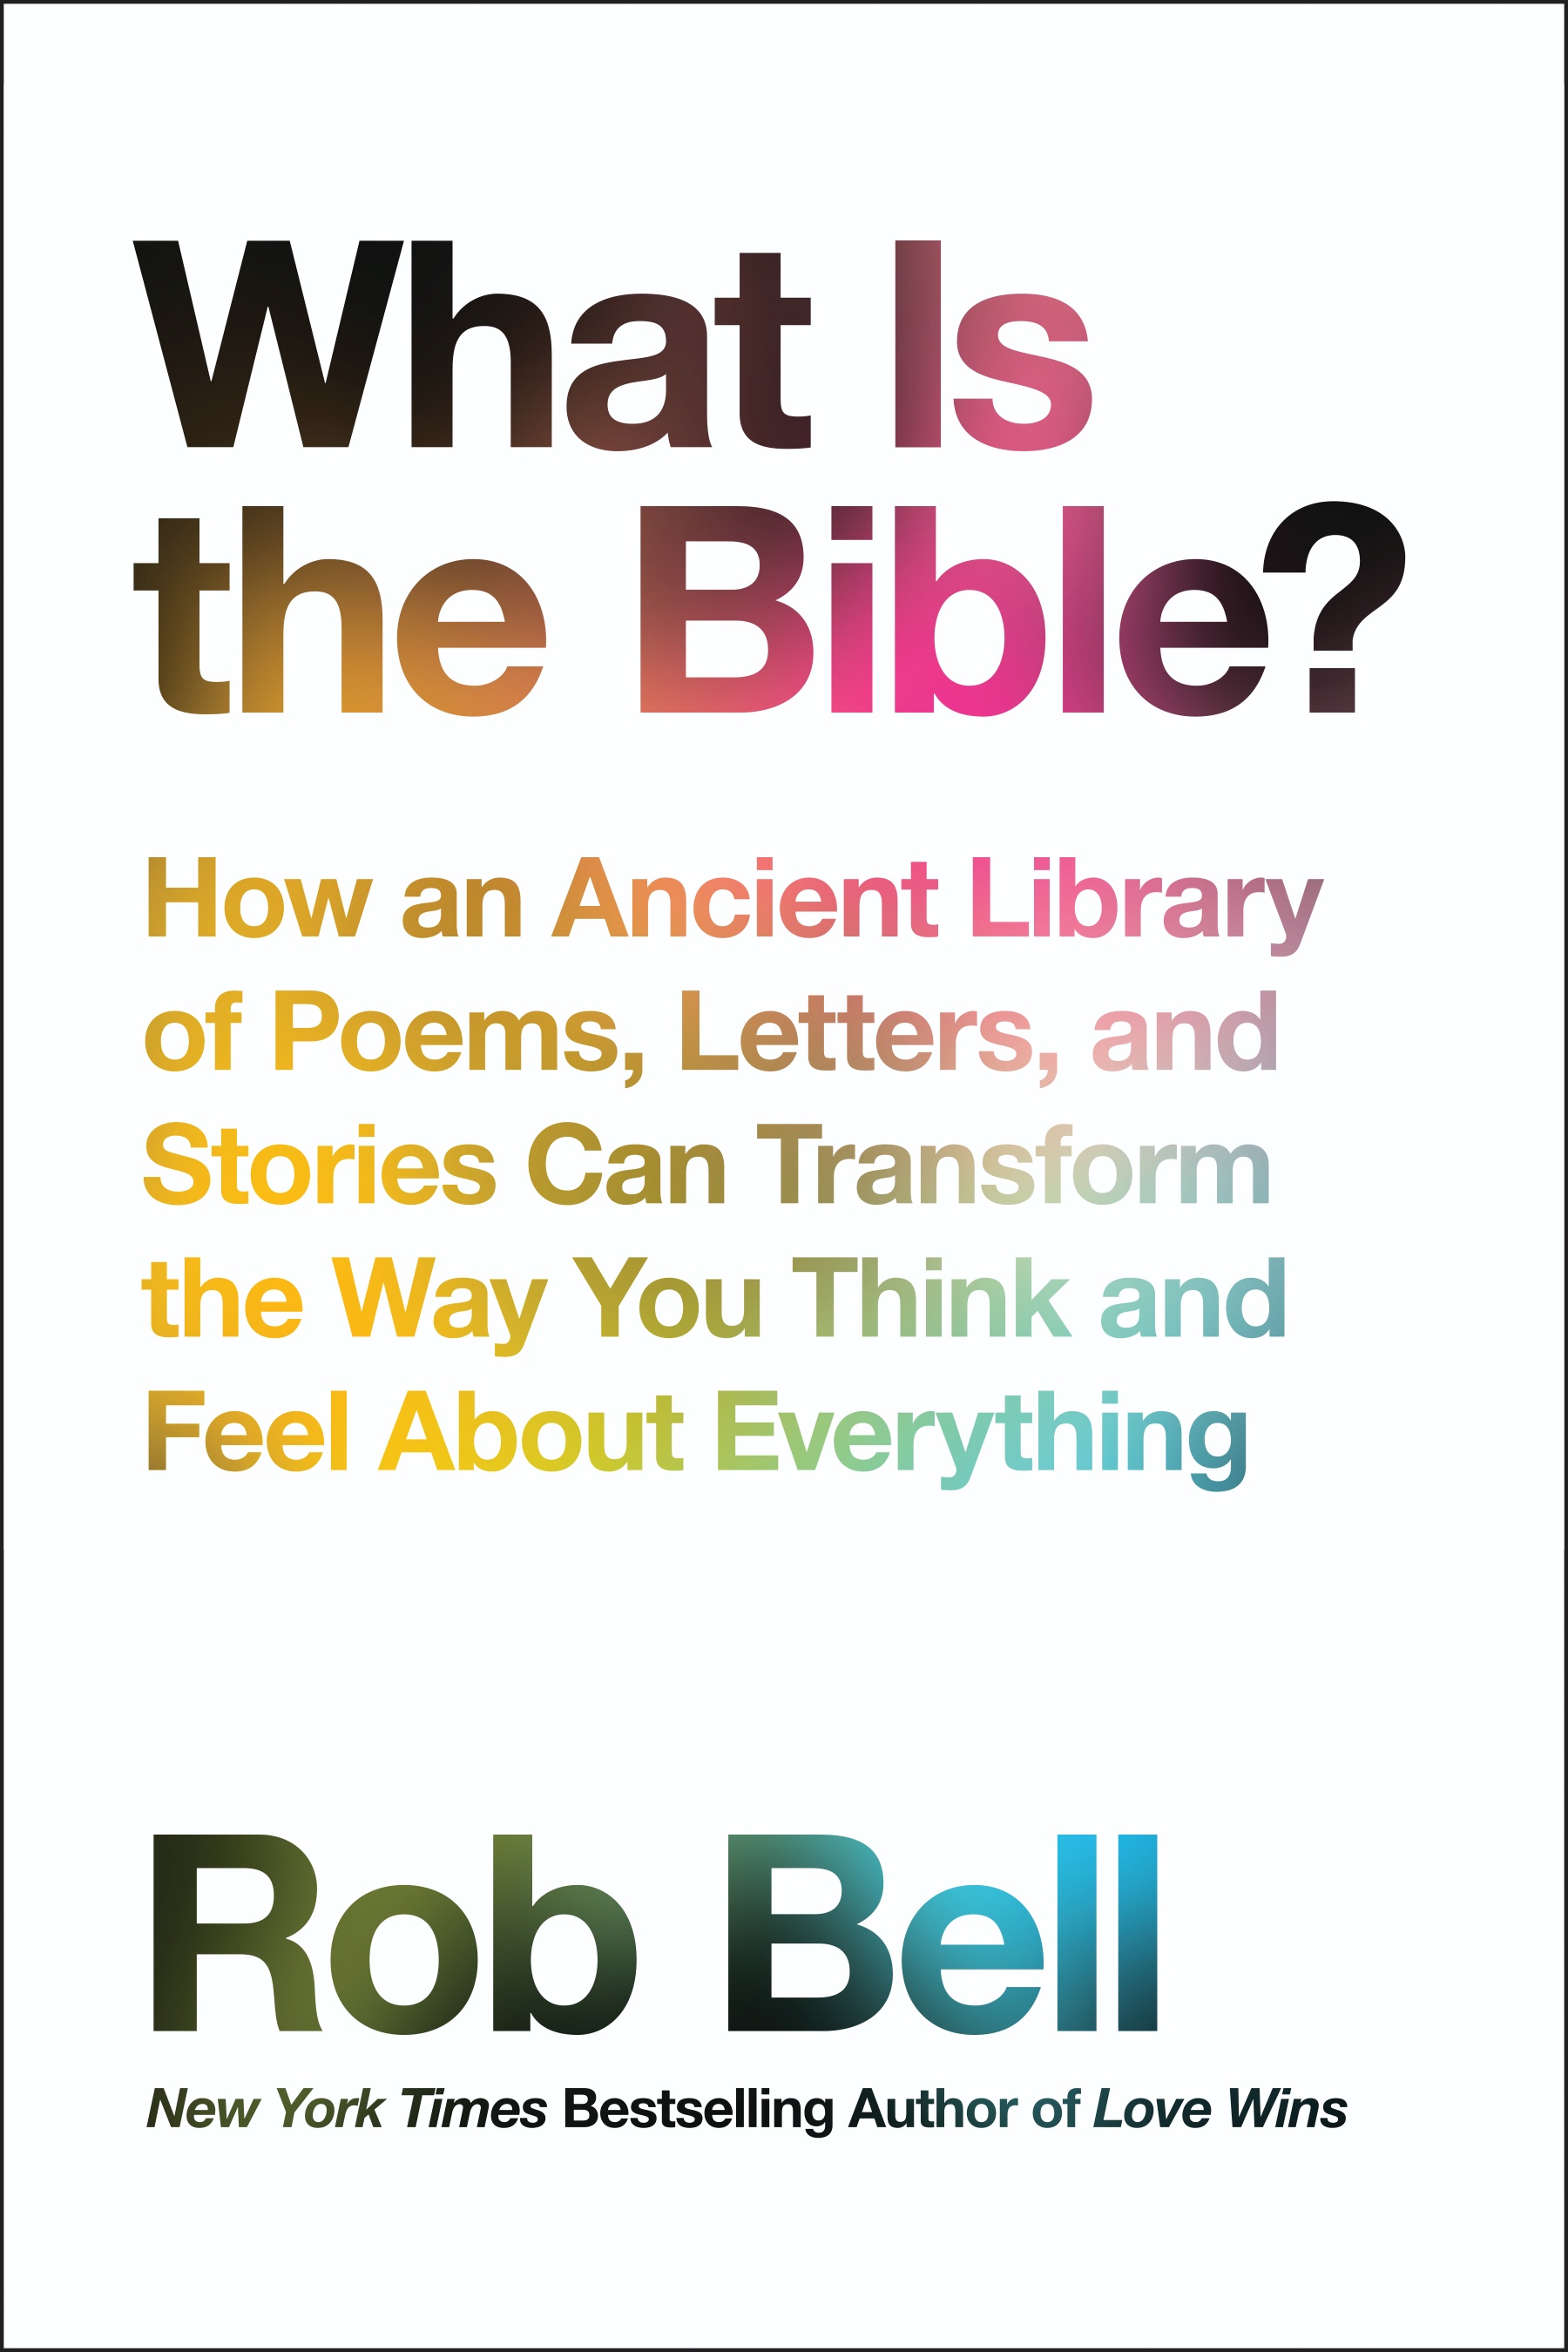 NYC Book Launch: What is the Bible?: How an Ancient Library of Poems, Letters, and Stories Can Transform the Way You Think and Feel About Everything by Rob Bell